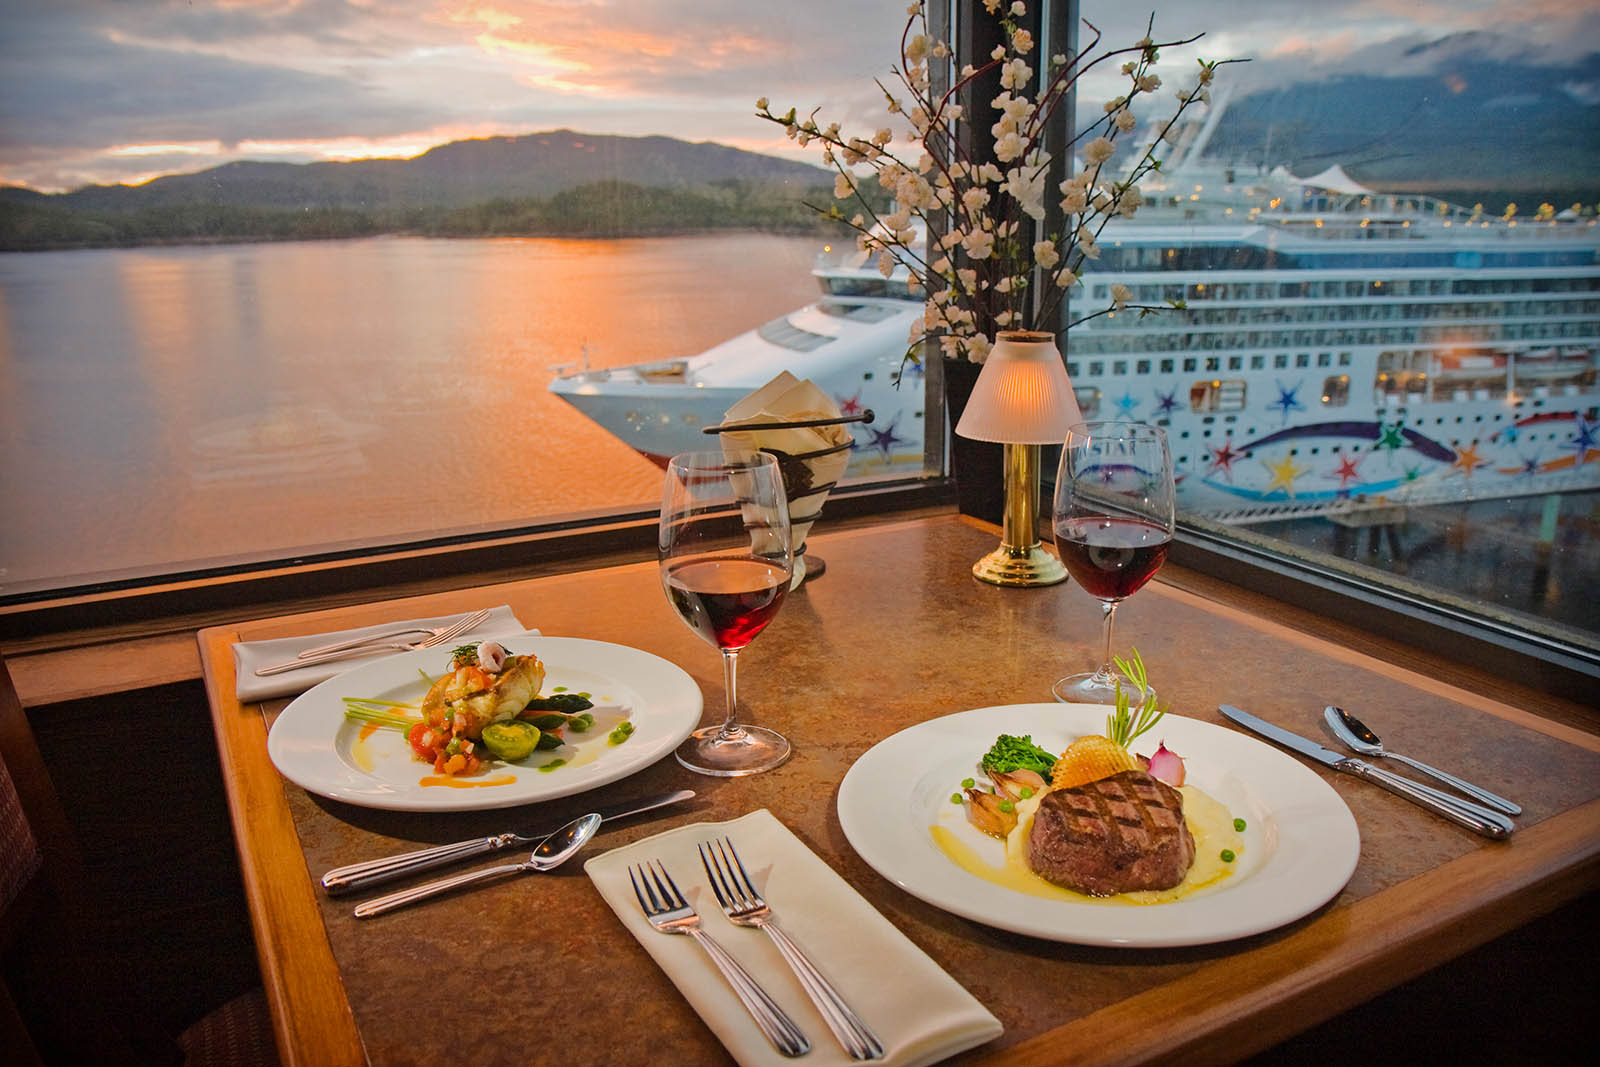 Dinner for two at Crest Hotel's waterfront restaurant on the harbour